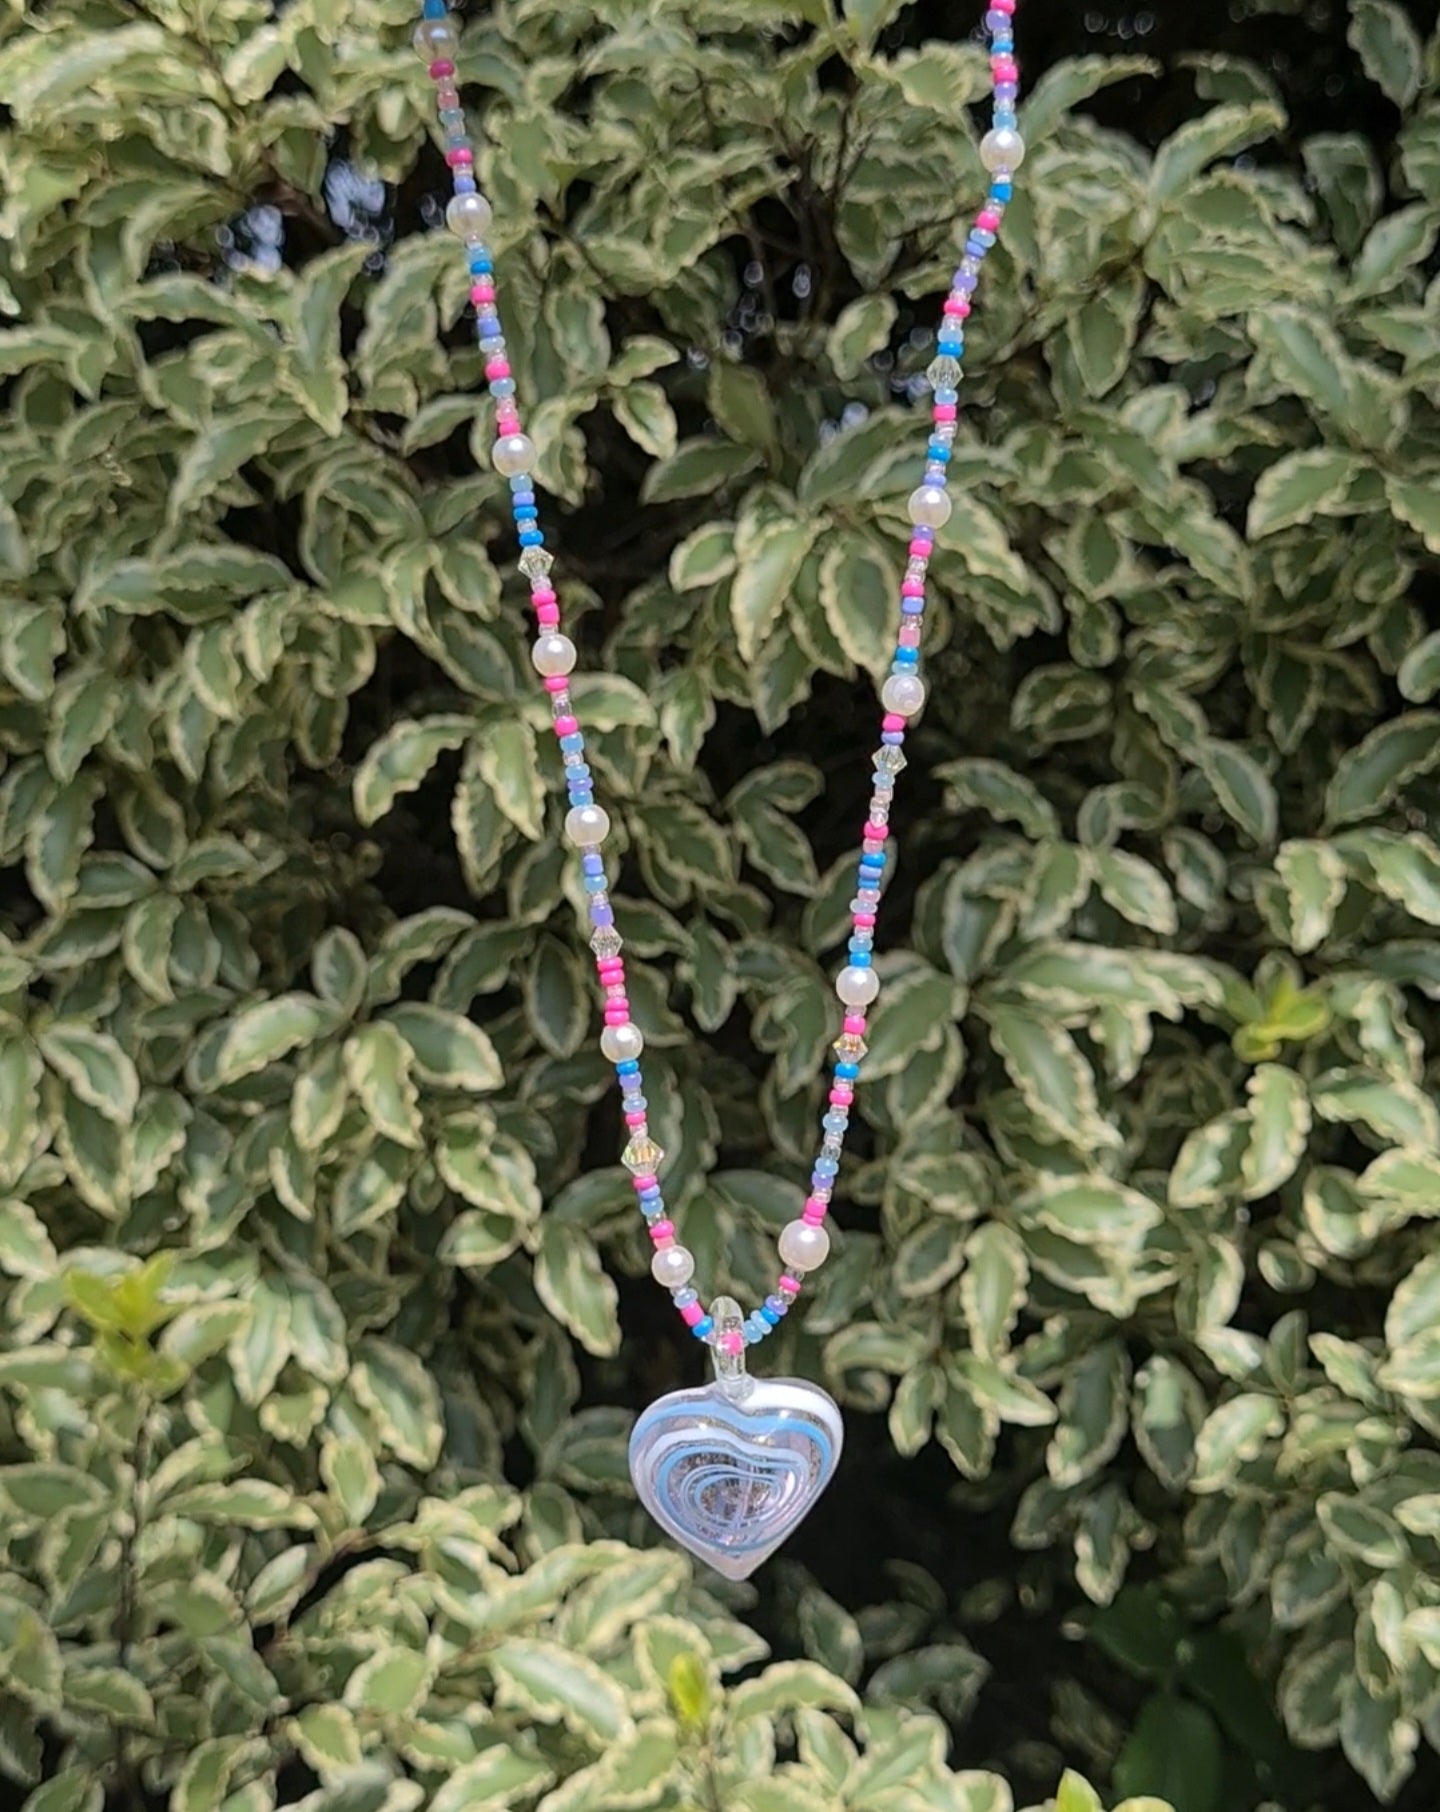 Heart of Glass necklace